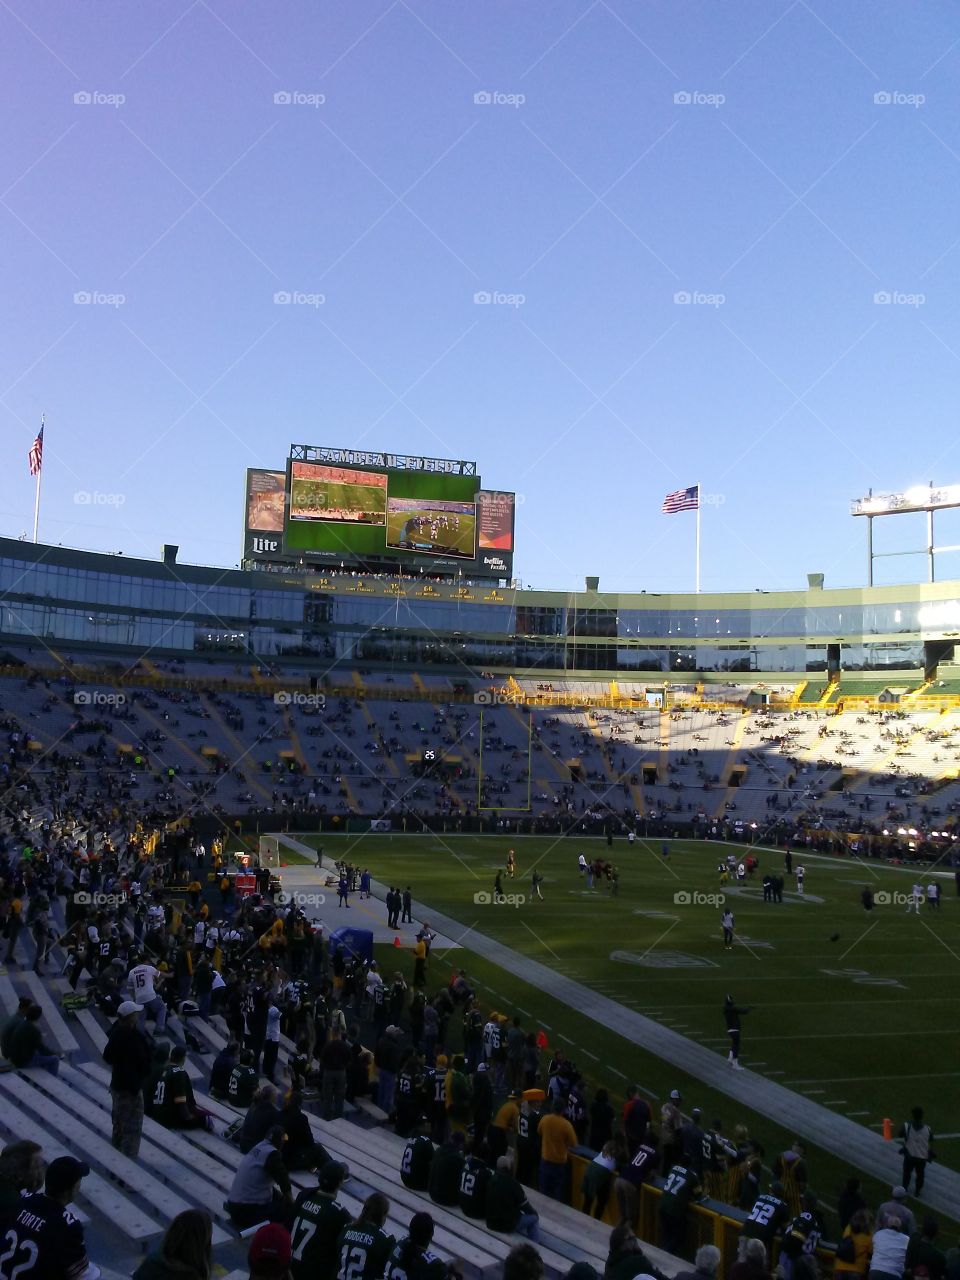 Looking at the North Endzone at Lambeau Field before the Packers hosted the Bears.